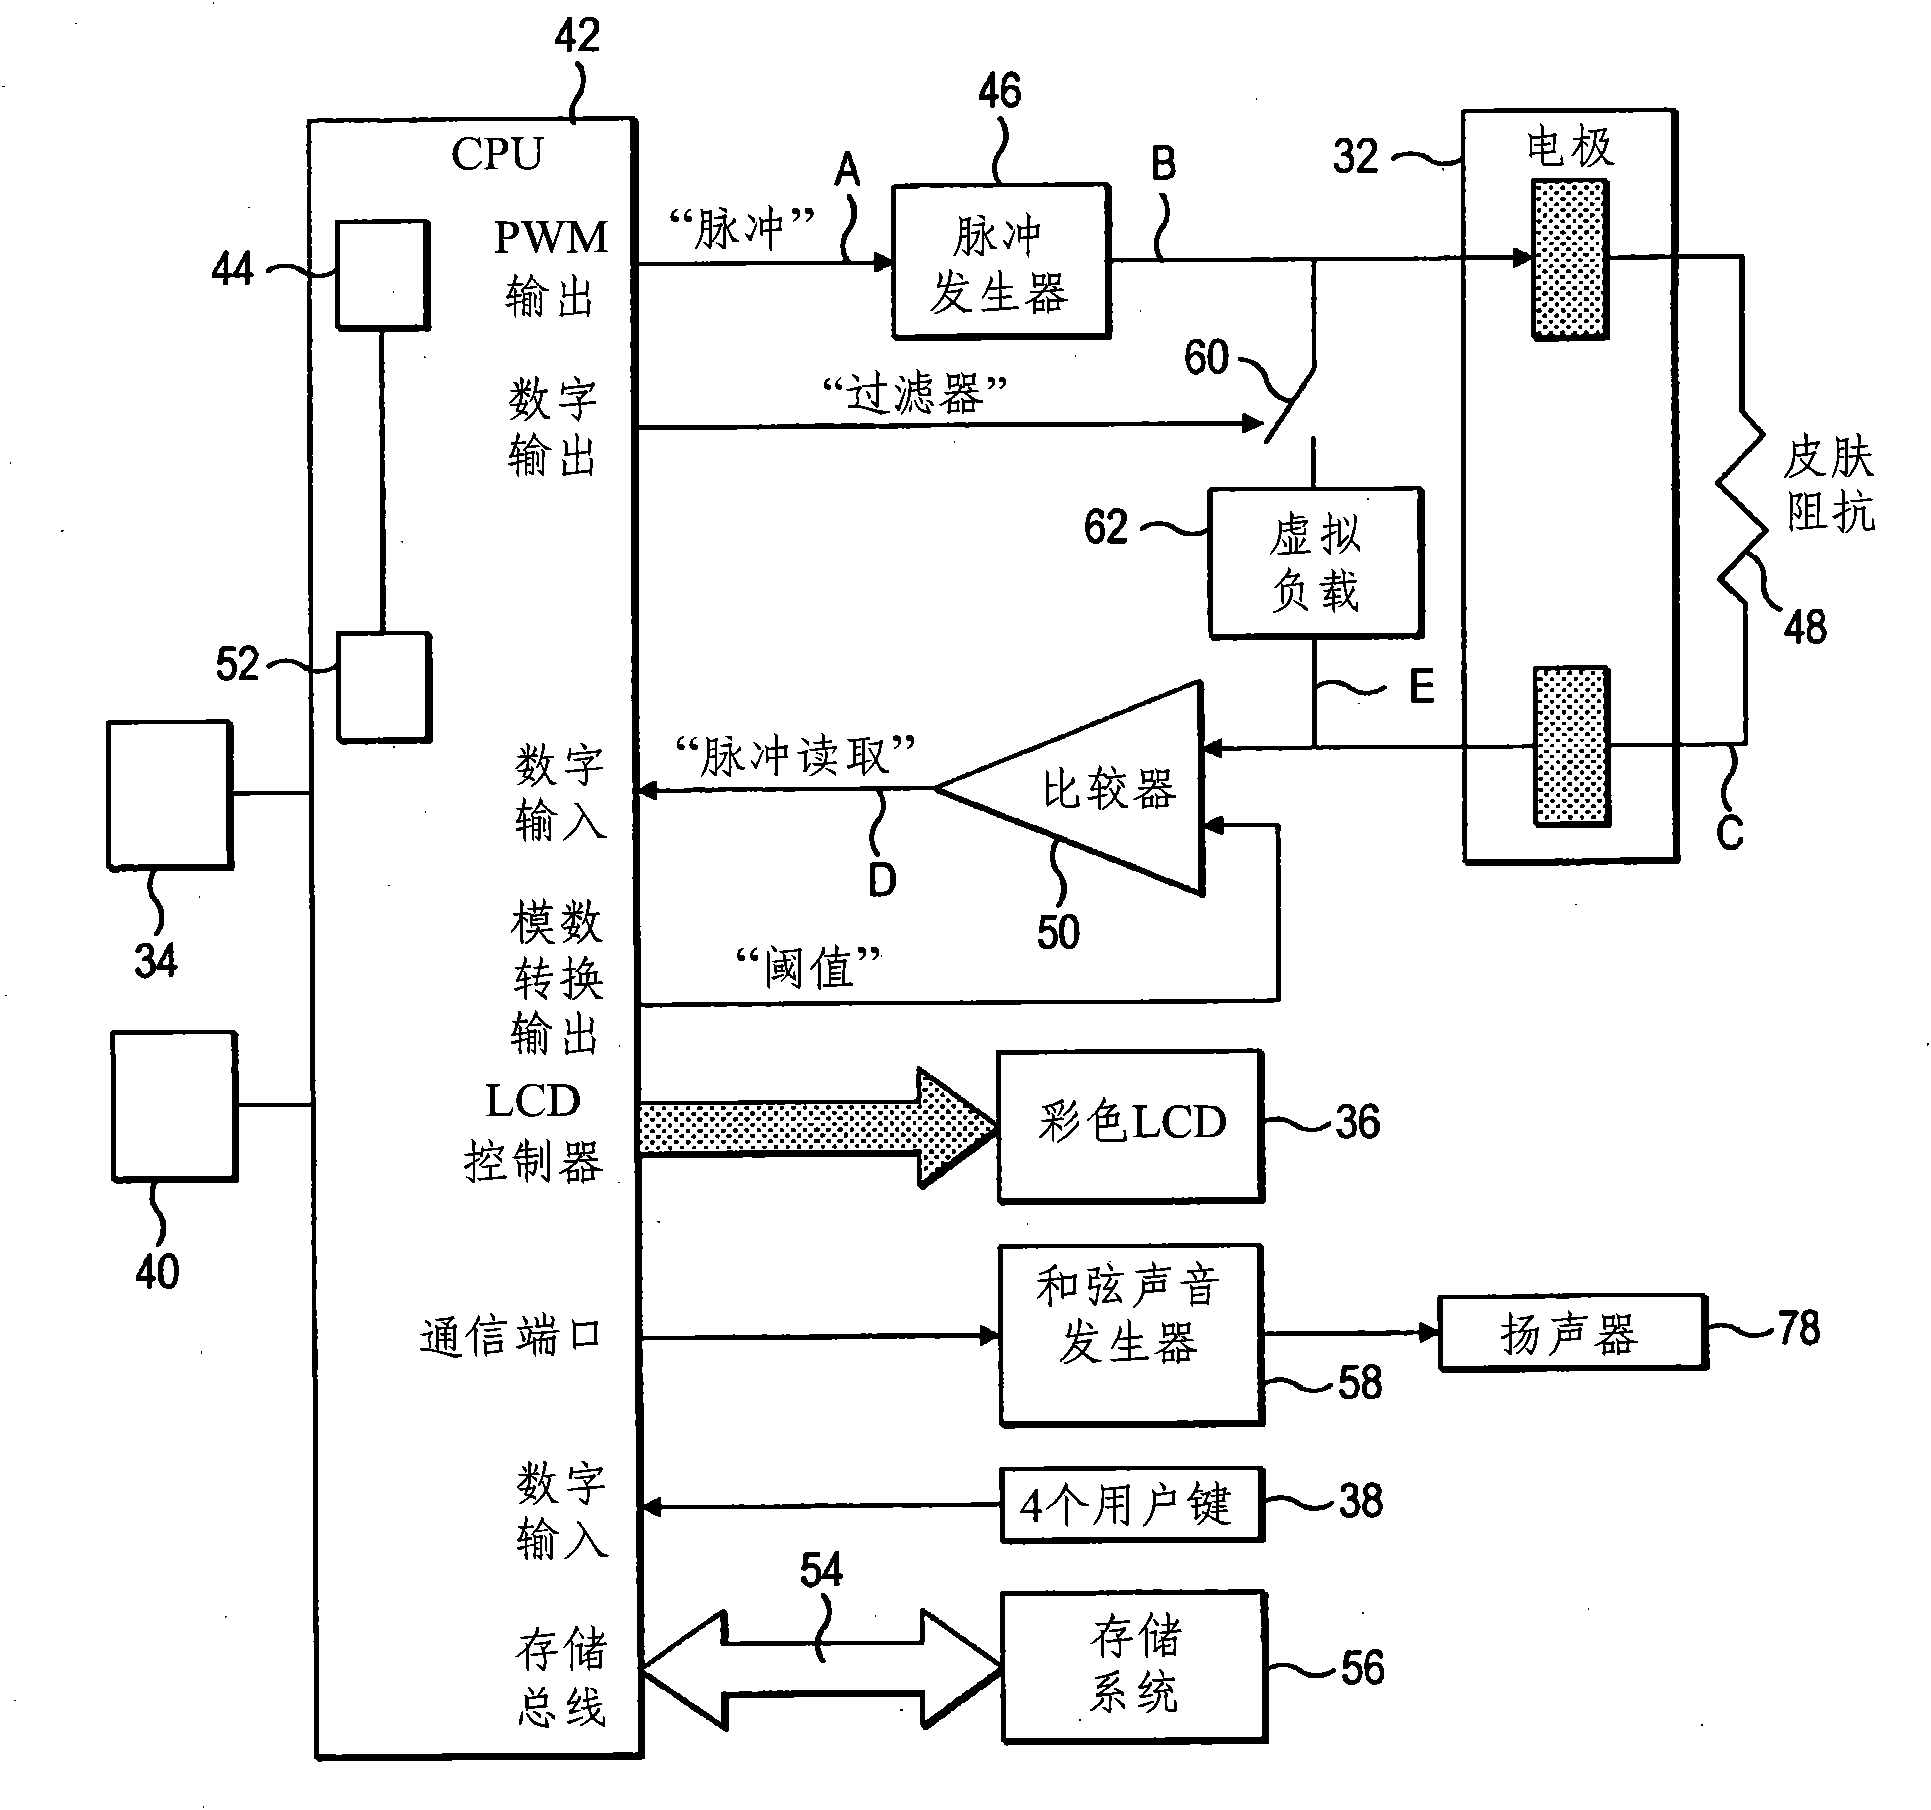 Electrical treatment apparatus